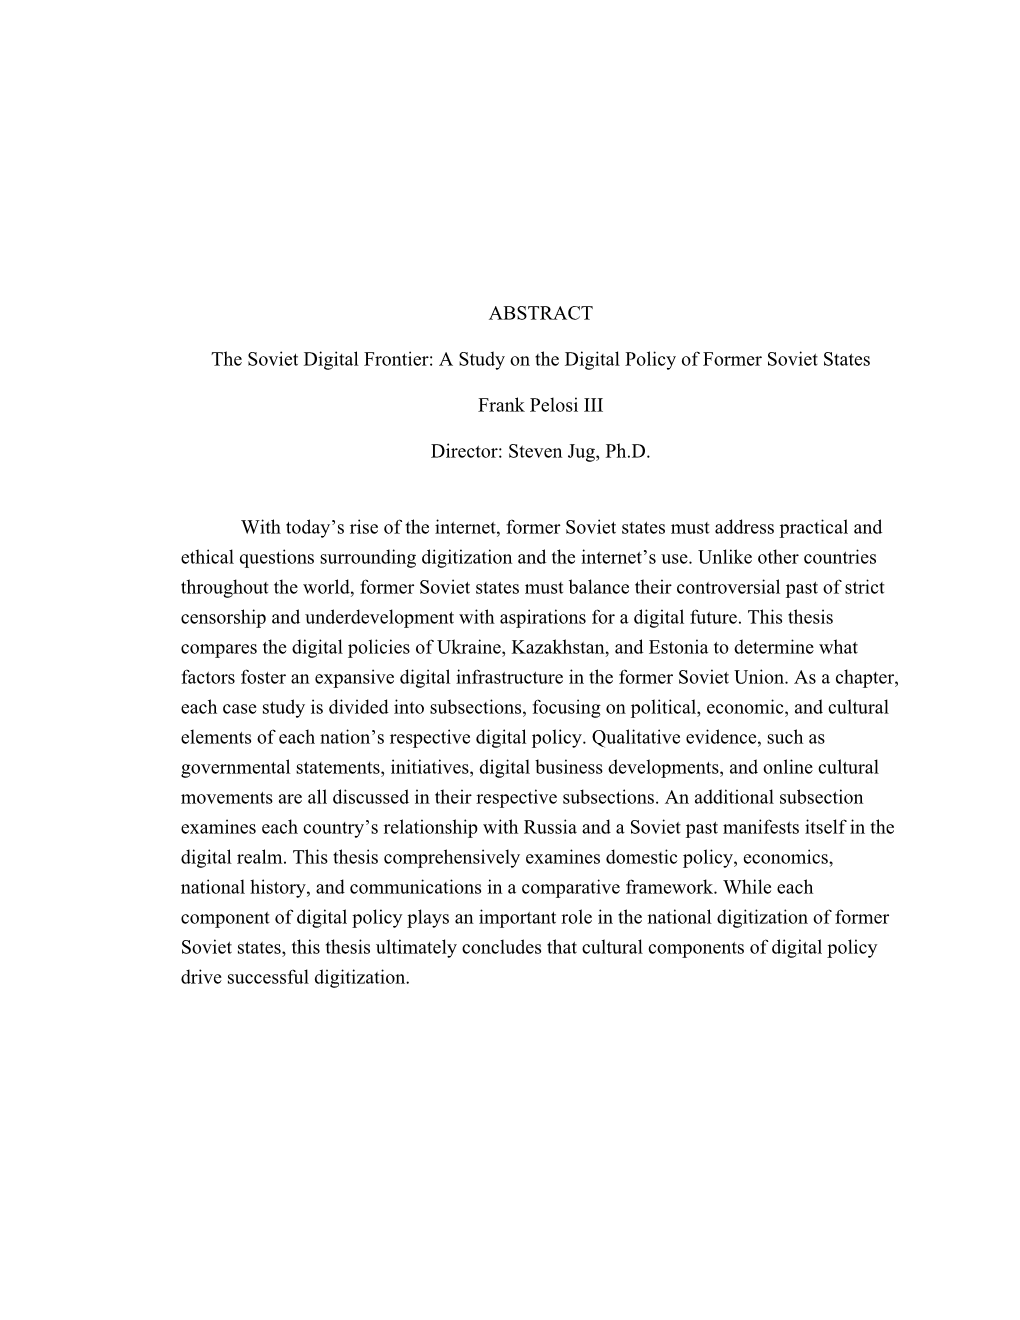 A Study on the Digital Policy of Former Soviet States Frank Pelosi III Director